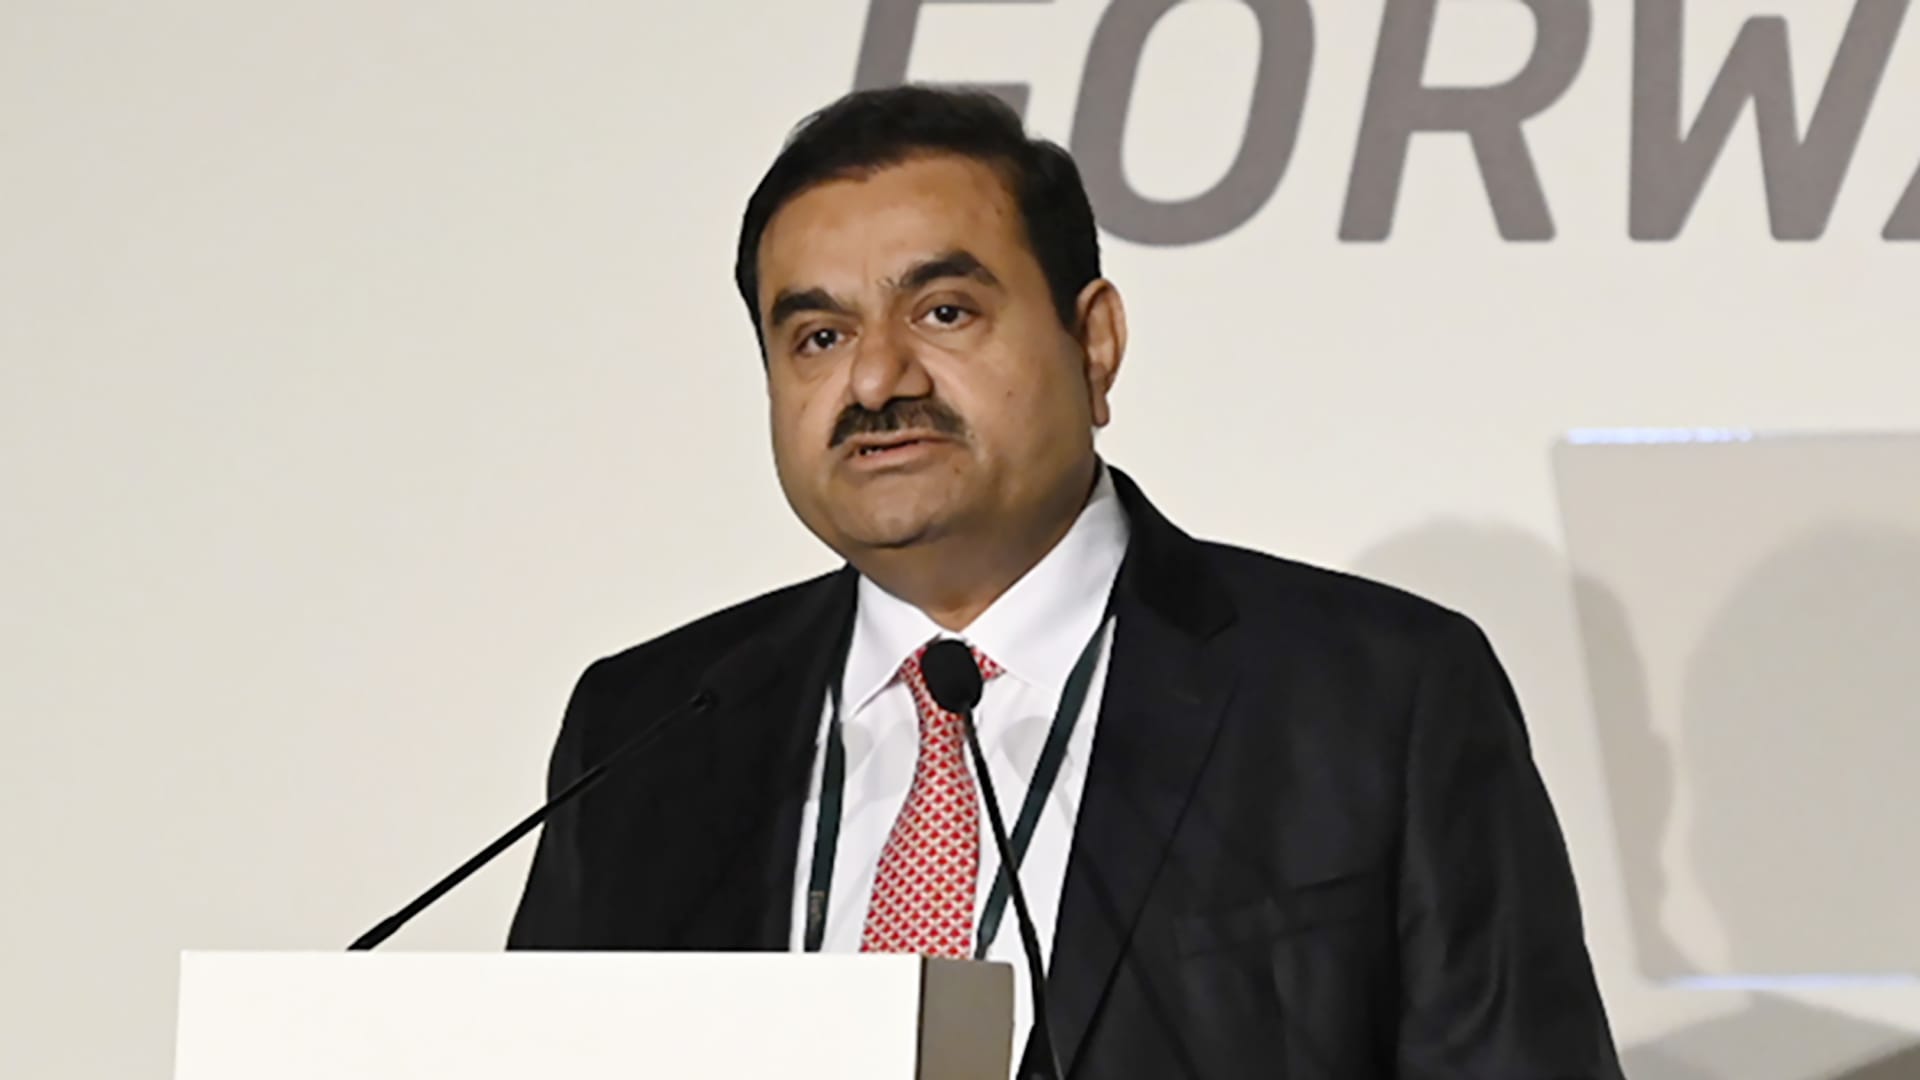 How Gautam Adani became the world’s fourth richest person although billionaires like Jeff Bezos dropped tens of billions